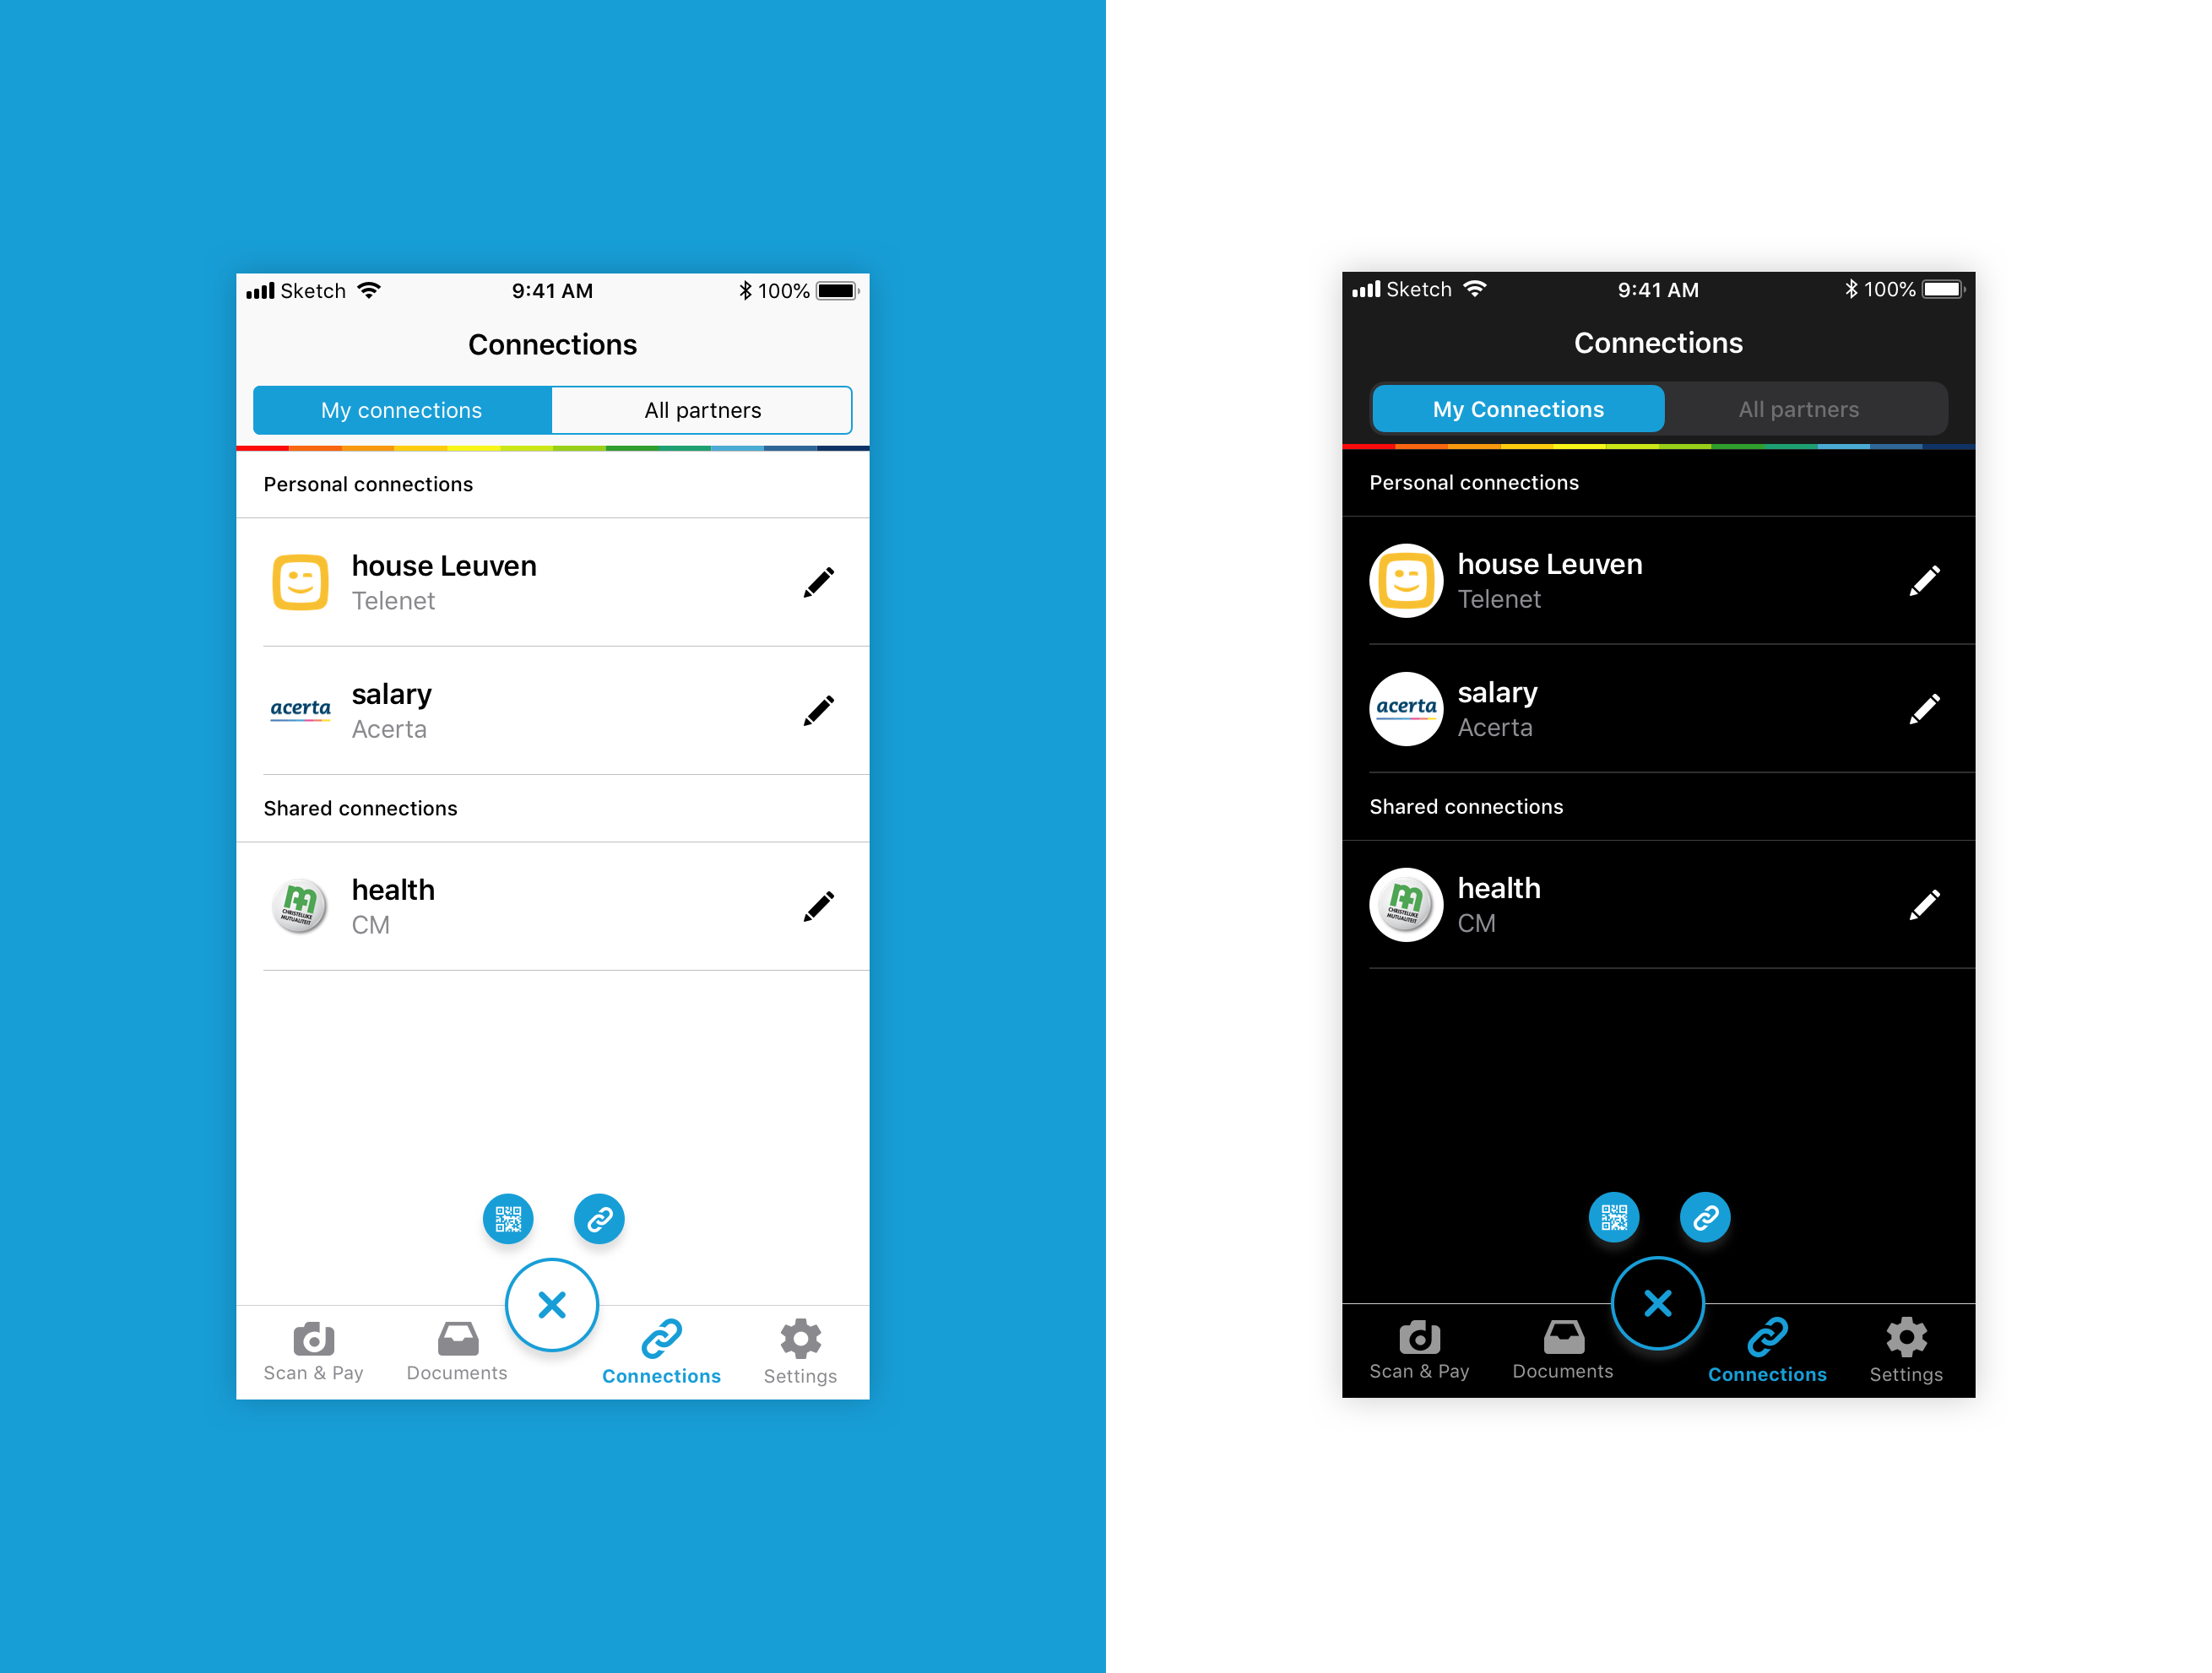 example of the redesign made for the Connections screen, both for light and dark mode. The image is a rectangle equally divided in two. On the left side the background is Doccle blue and we have the light version of the redesign for the Connections screen for iOS 12. On the right side the background is white and we have the dark version of the Connections screen, for iOS 13.